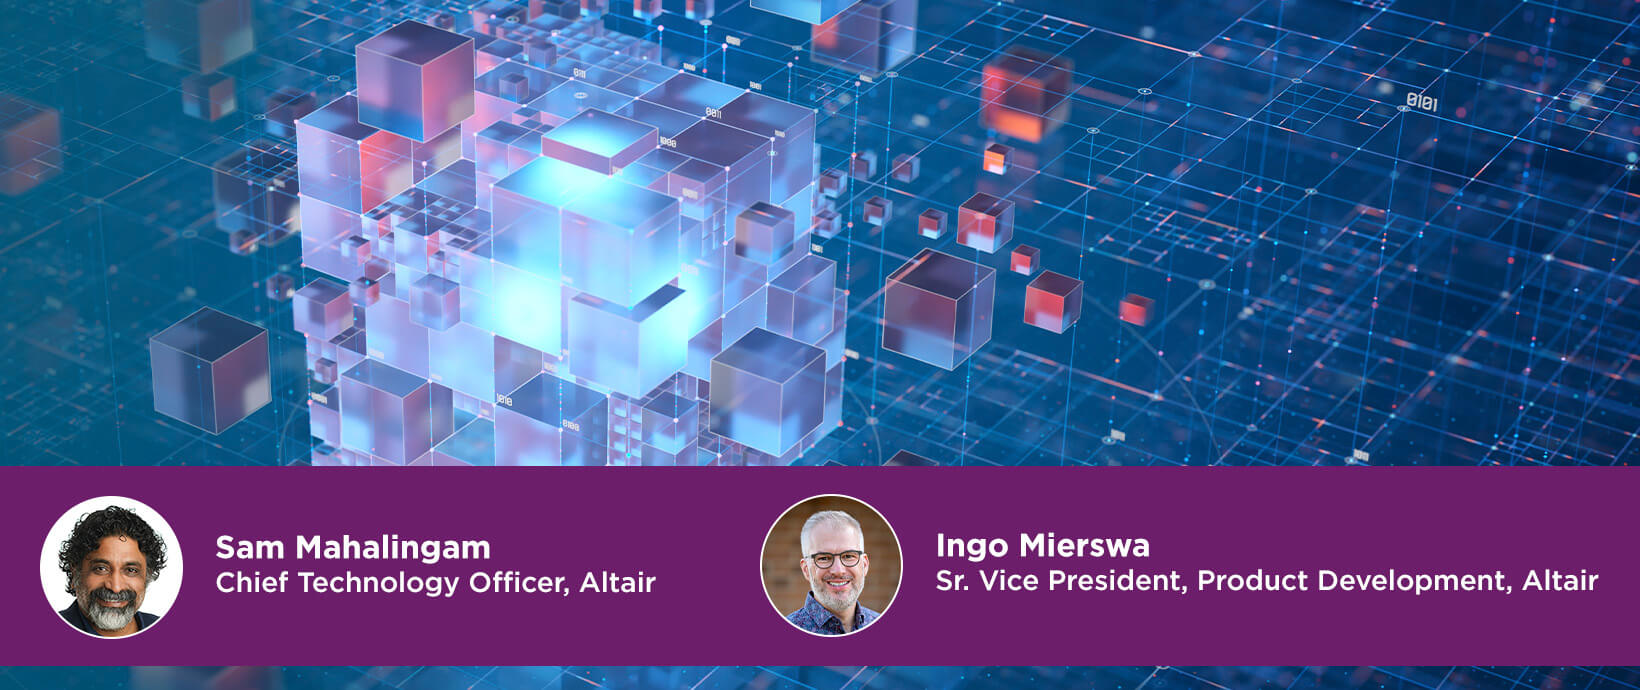 A Data Science Chat with Dr. Ingo Mierswa